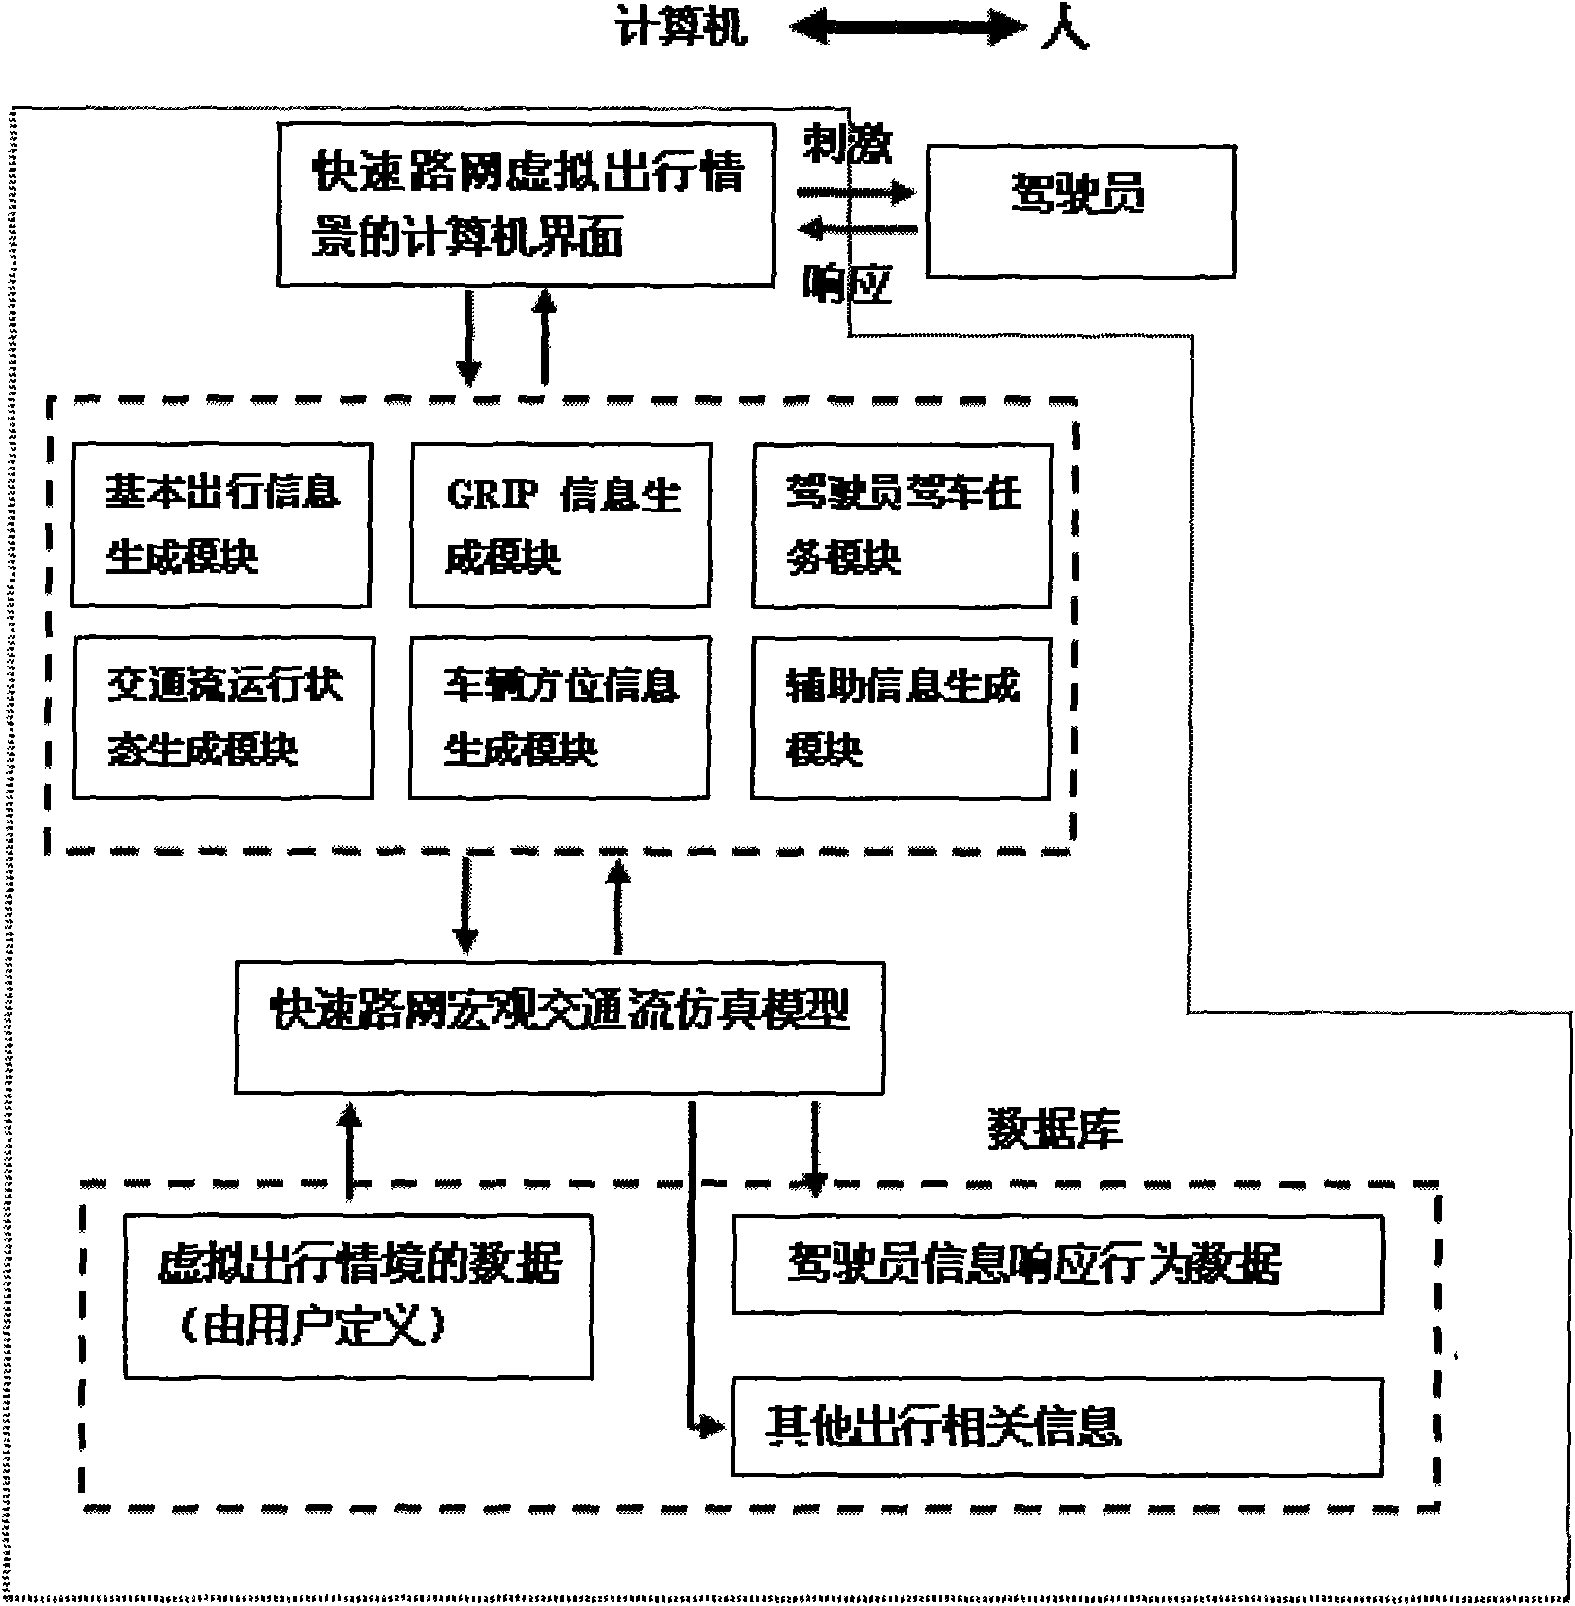 Computer dynamic simulation method of driver dynamic response behavior about graphic path information board